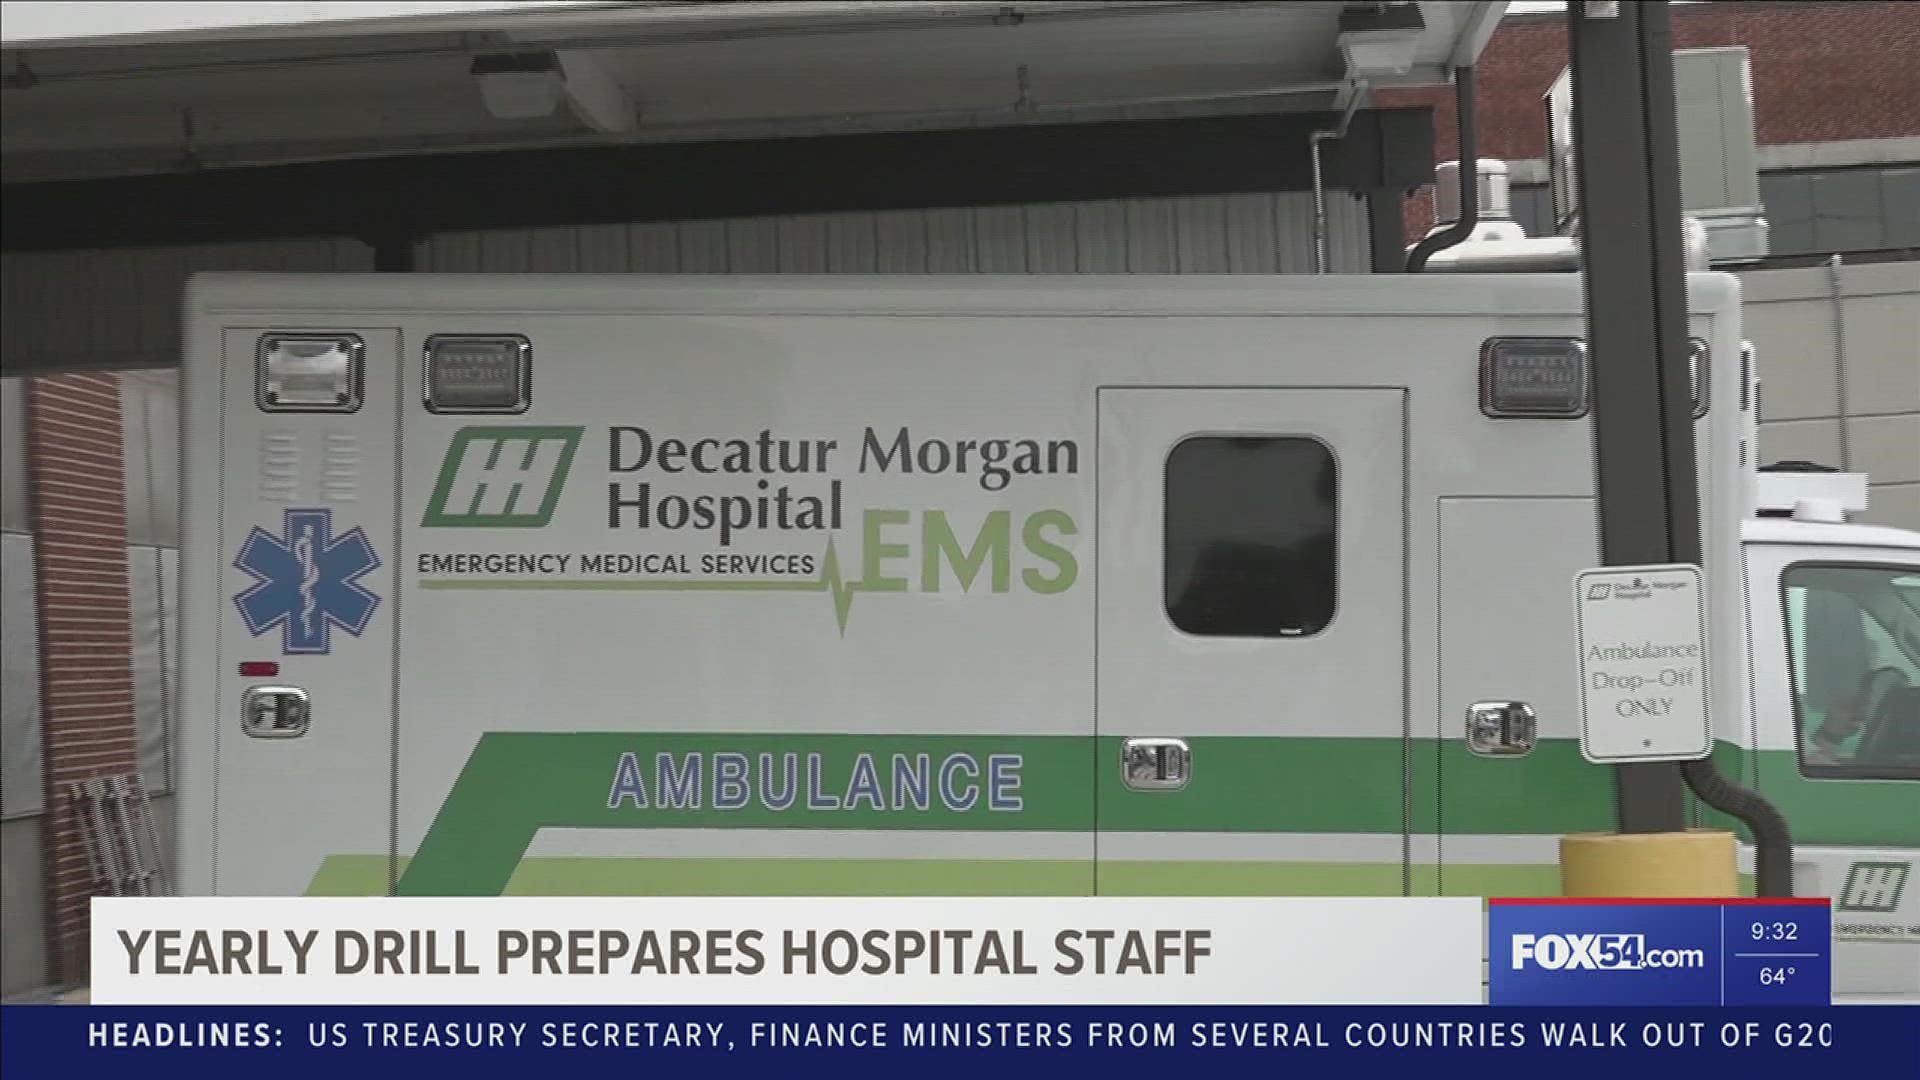 DECATUR MORGAN HOSPITAL HELD A DISASTER DRILL TO PRACTICE HOW THEIR STAFF WOULD RESPOND TO A TORNADO THAT COULD RESULT IN MASS CASUALTIES.